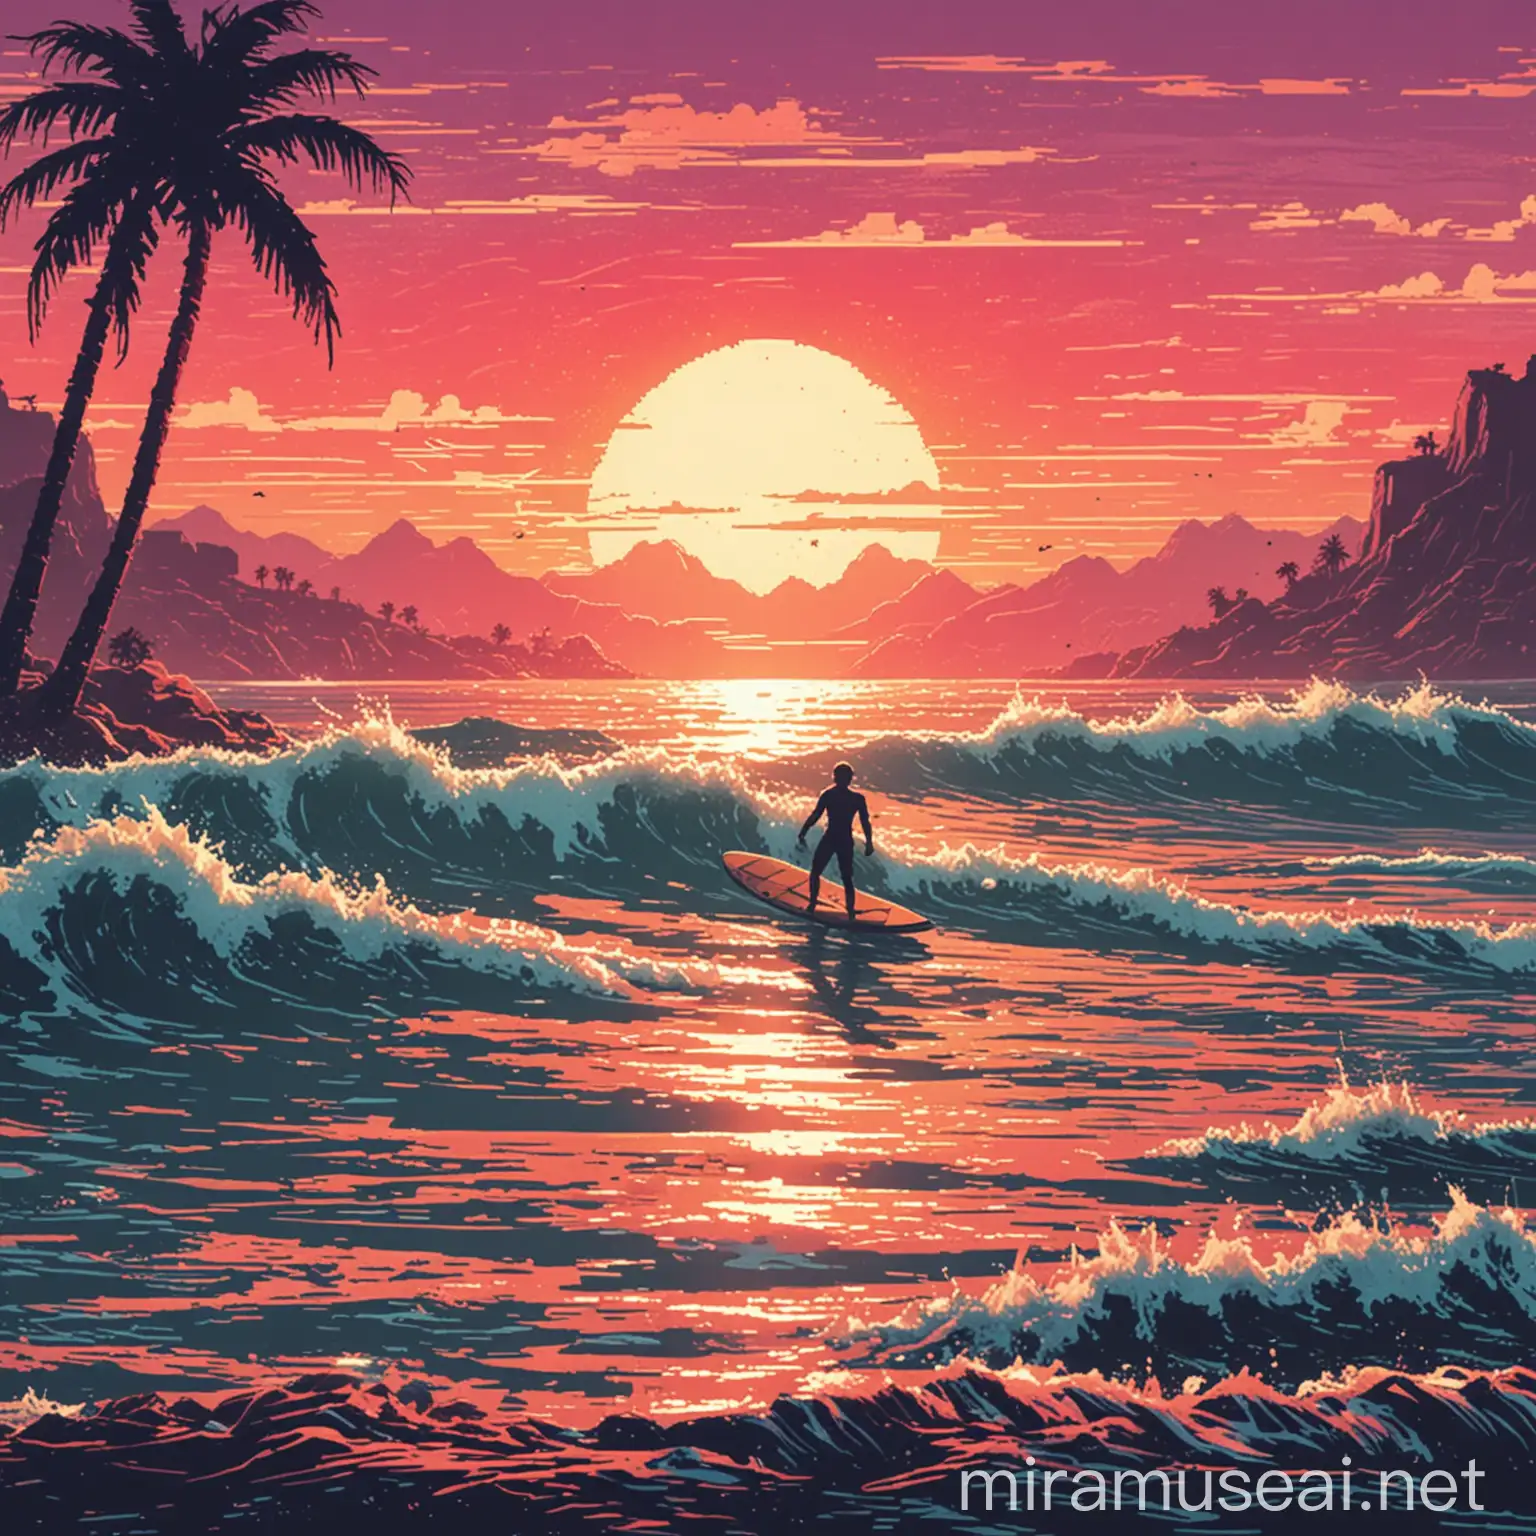 Pixel Retro Sunset Surfer Riding Waves in 80s Style